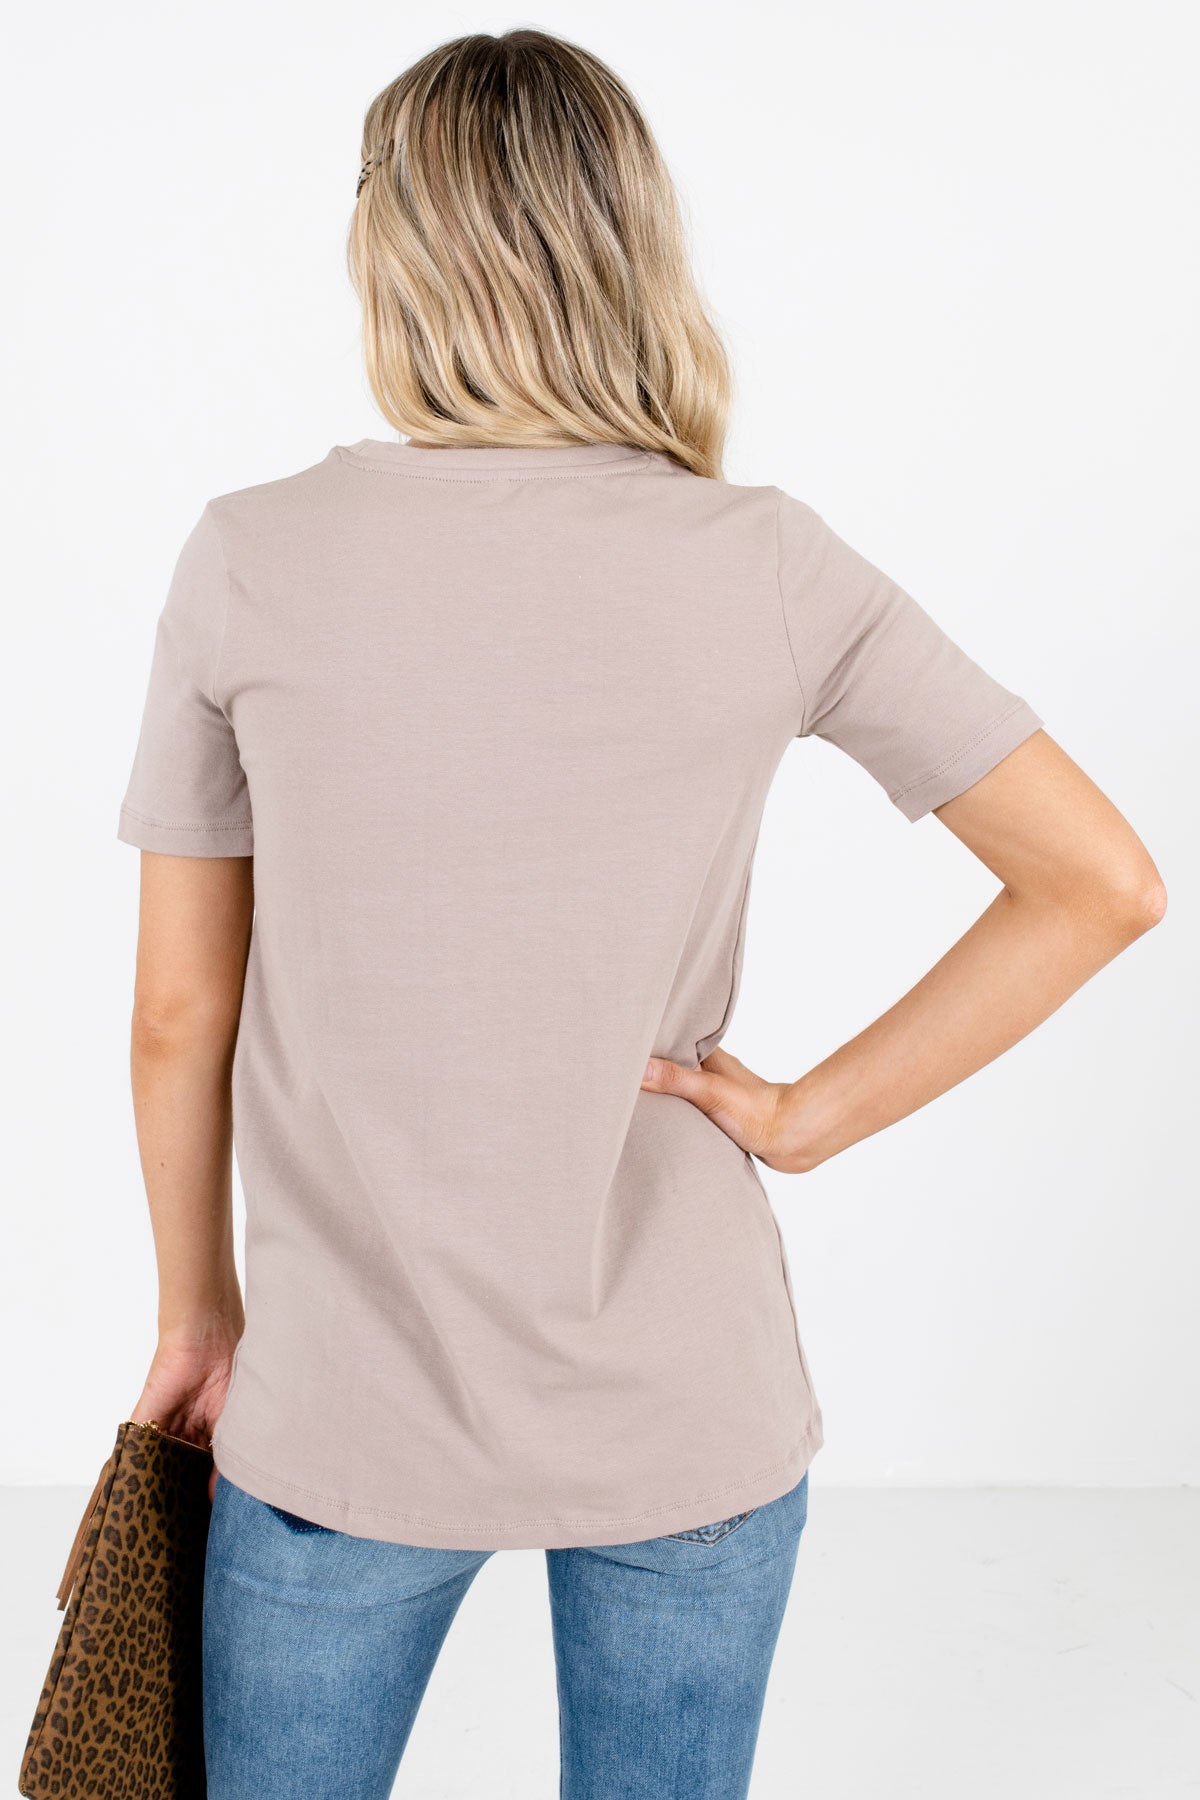 Women's Taupe Brown Short Sleeve Boutique Tops